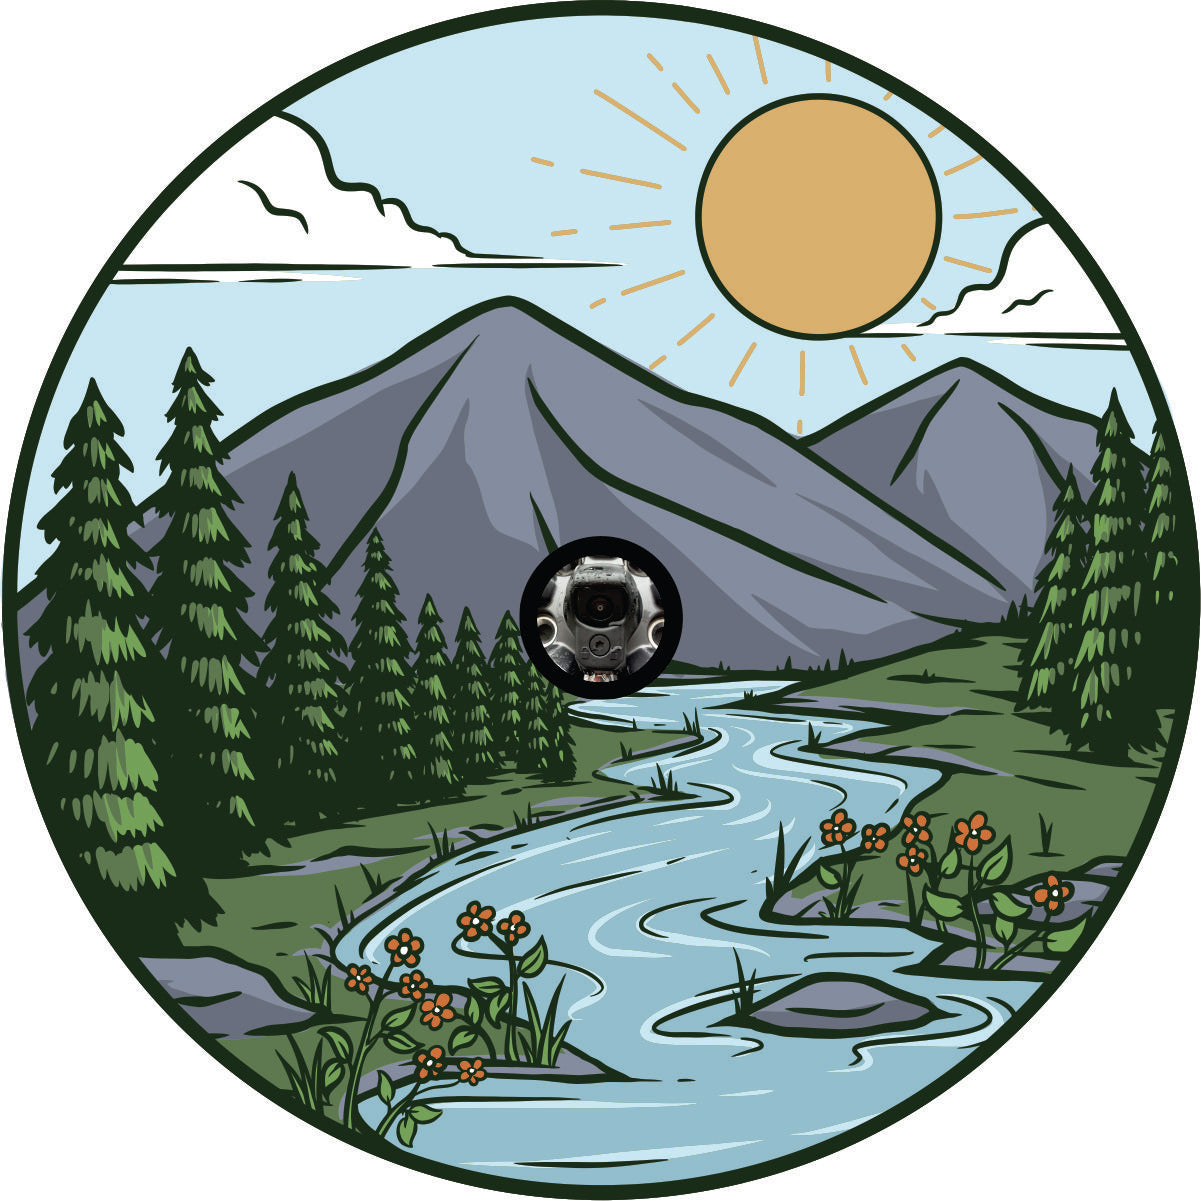 Sun, mountains, river, trees, painted unique spare tire cover design with camera hole space